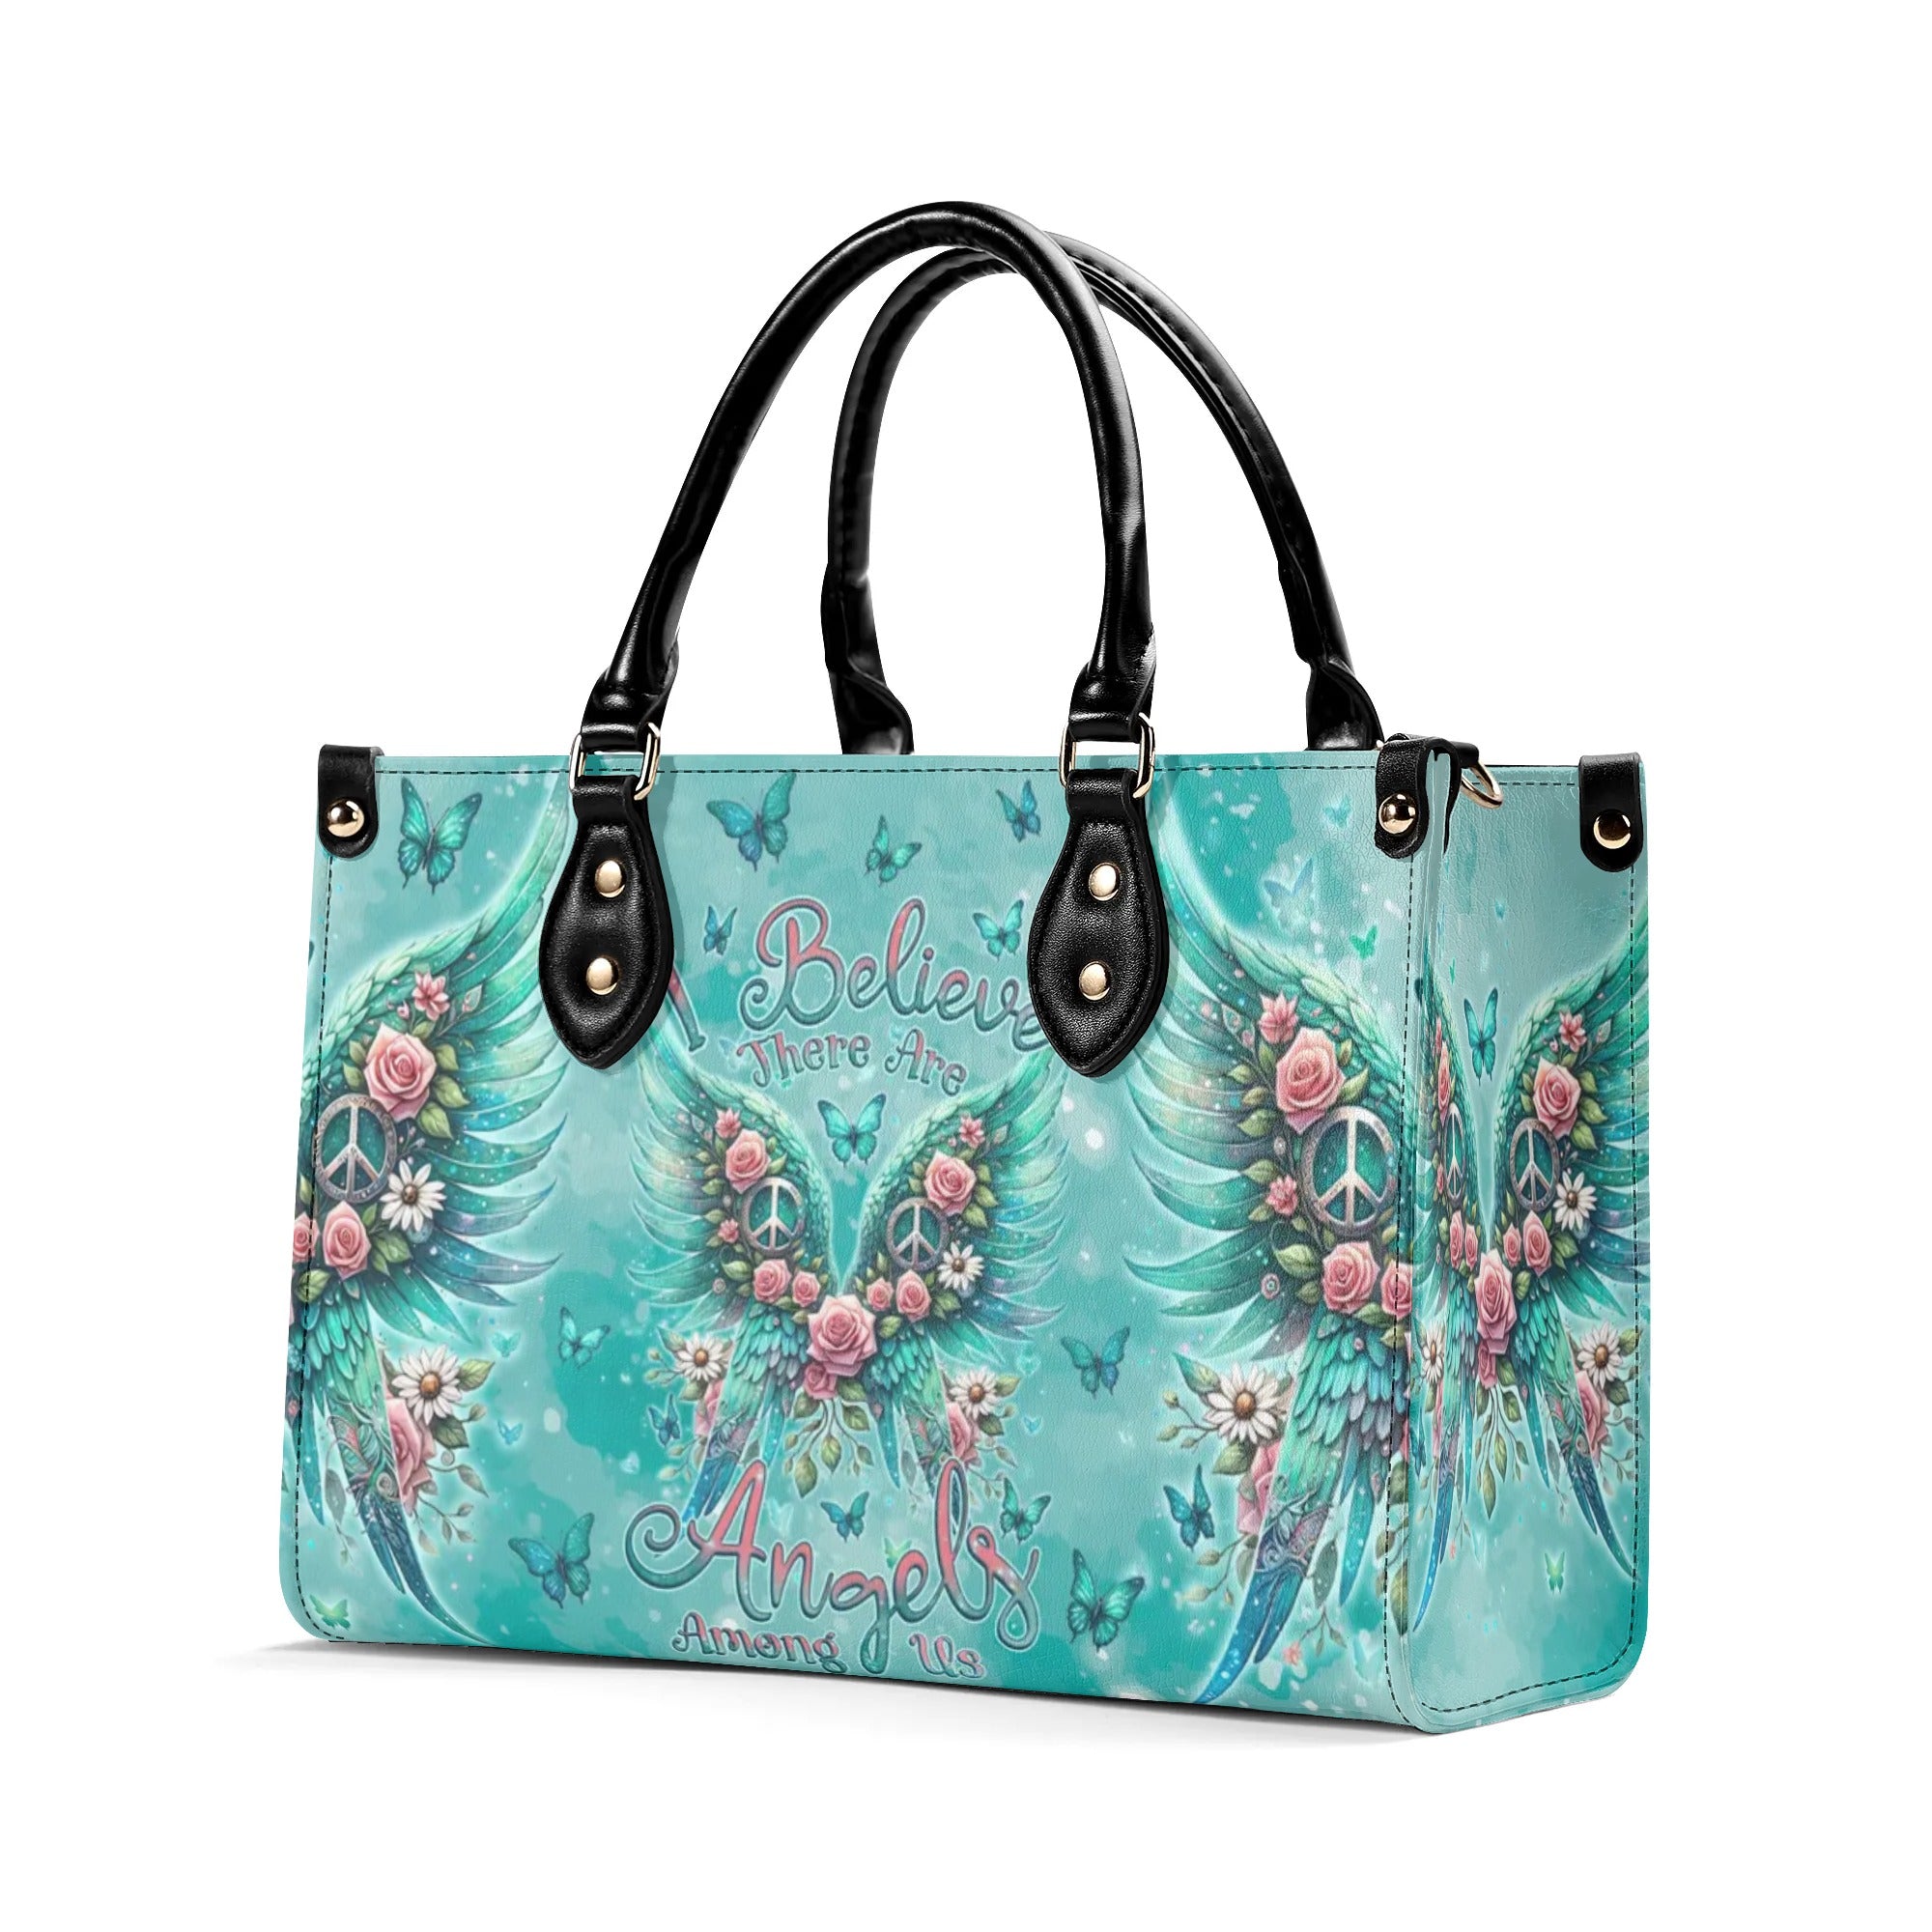 I BELIEVE THERE ARE ANGELS AMONG US LEATHER HANDBAG - TLNZ0706244